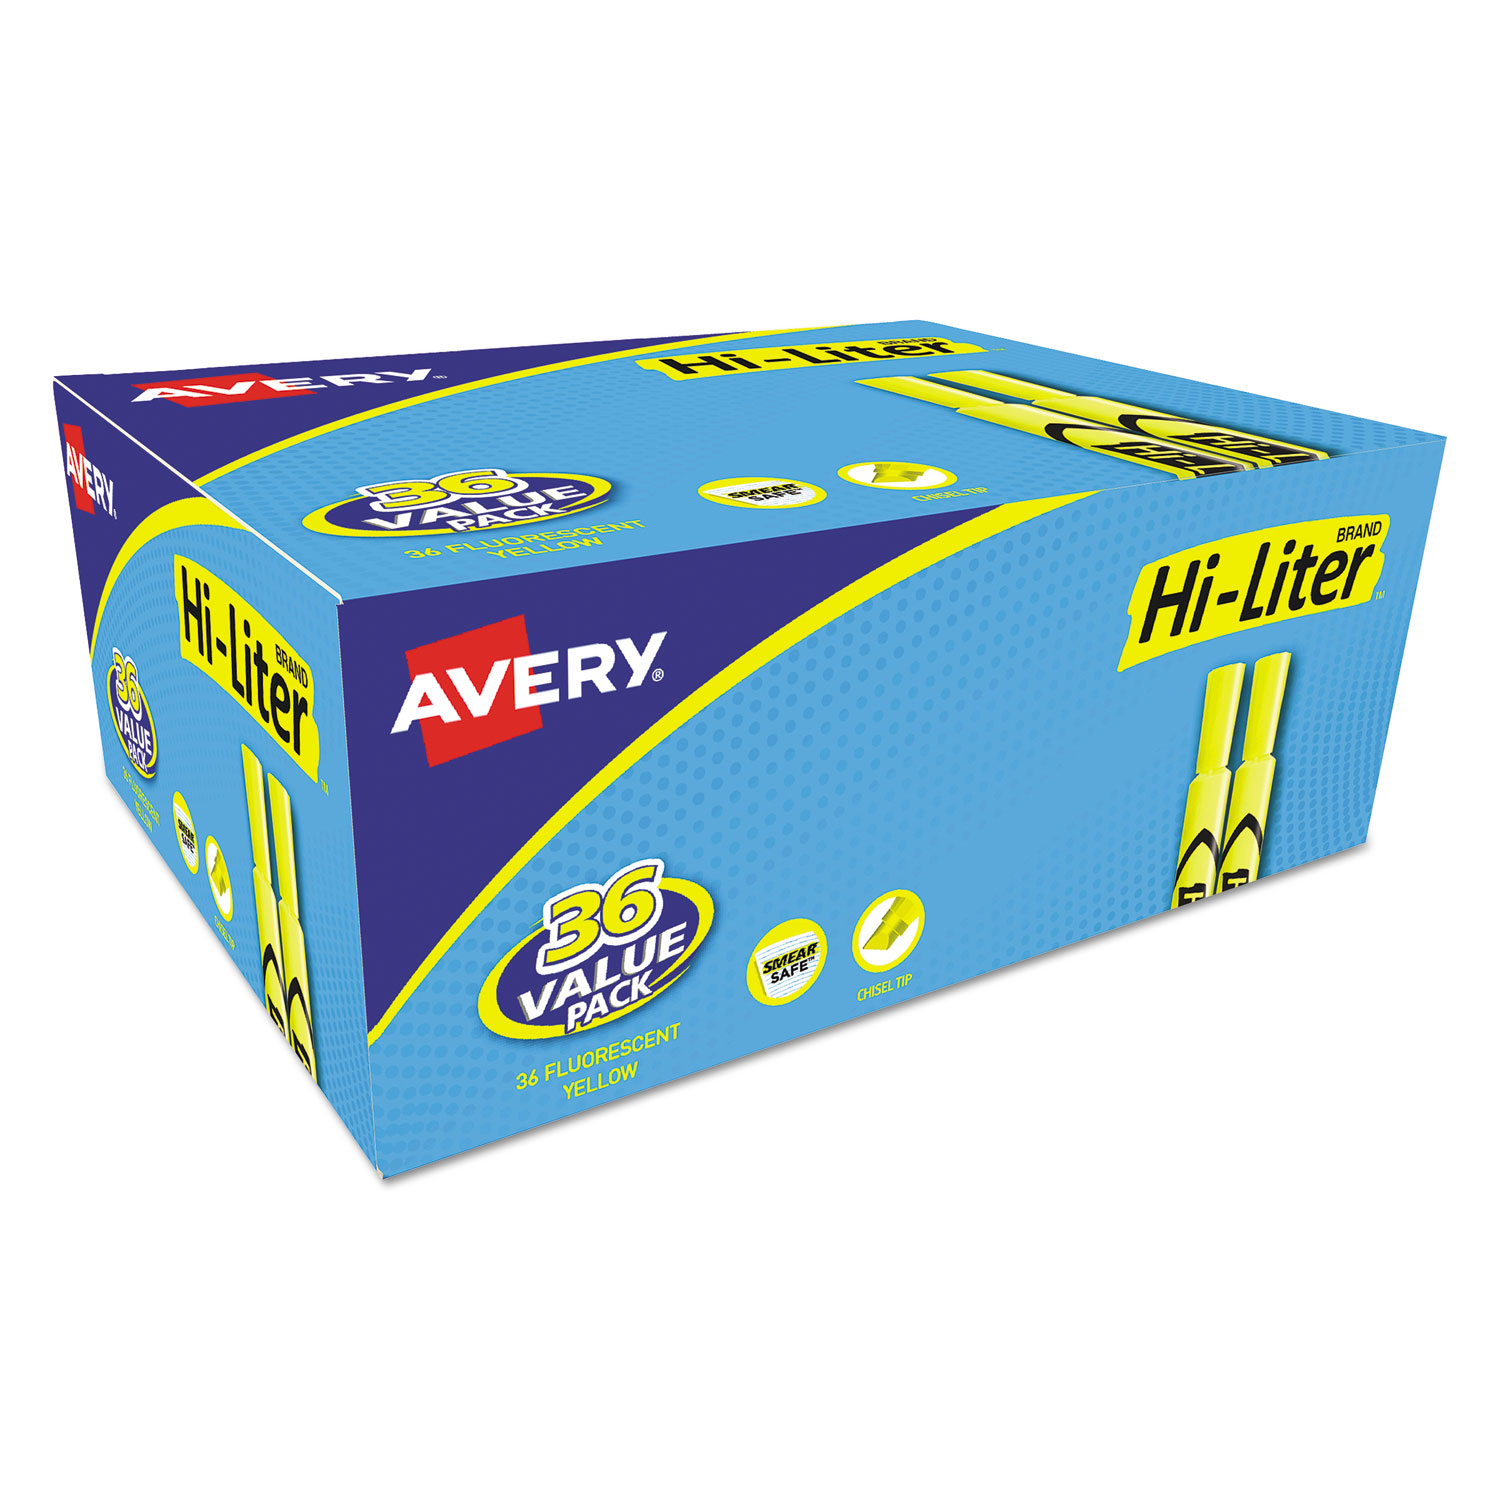  Avery 98208 HI-LITER Desk-Style Highlighters, Chisel Tip, Fluorescent Yellow, 36/Box (AVE98208) 